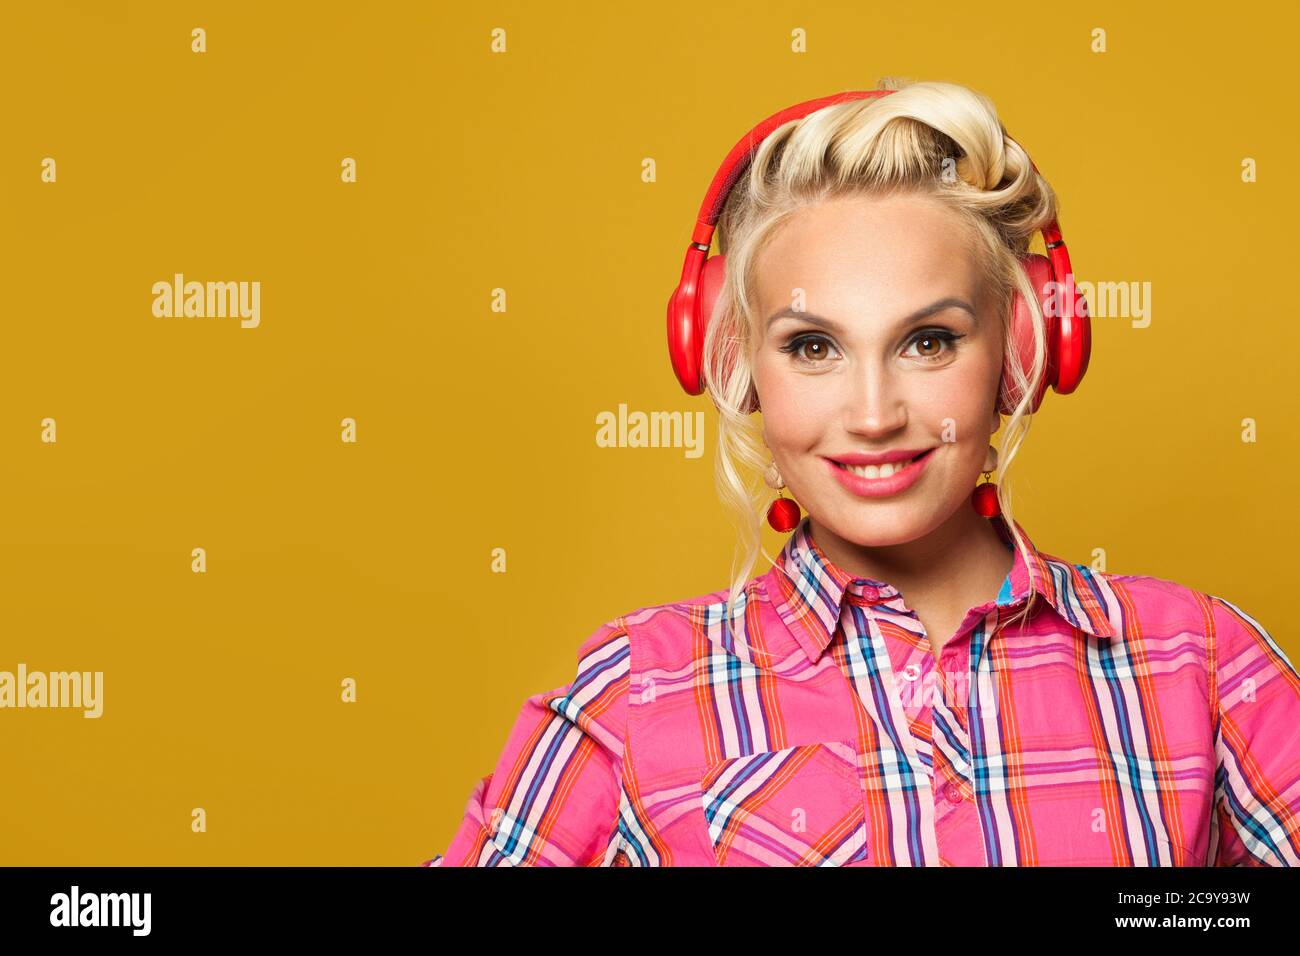 Pretty pinup girl listening music with headphones on bright yellow background. Pretty retro model woman with red lips makeup and vintage fashion hairs Stock Photo